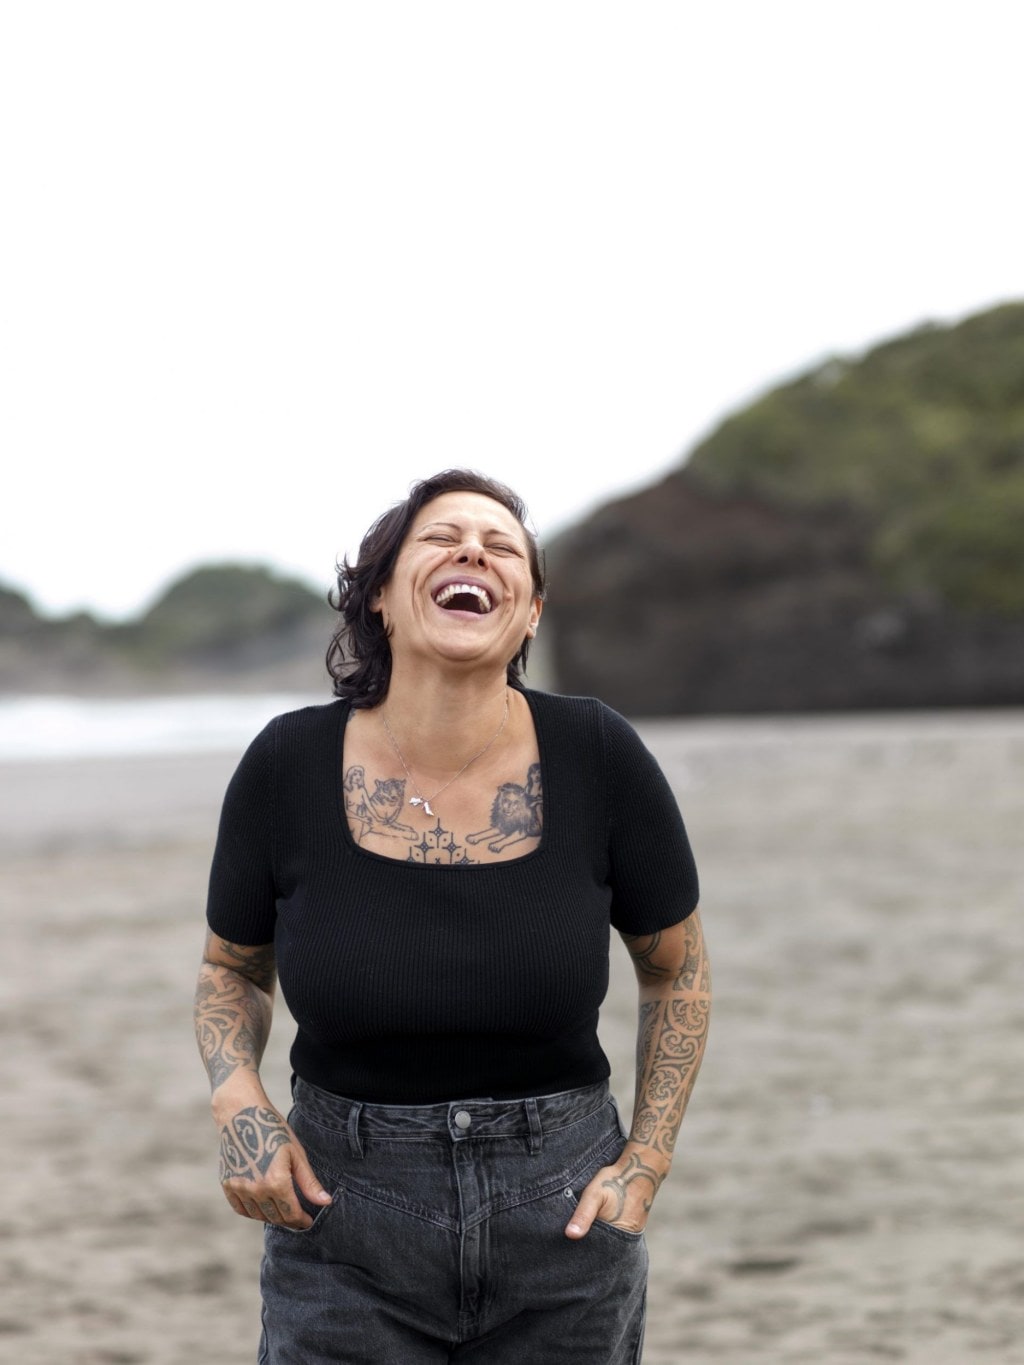 Anika Moa wearing black top and jeans standing at a beach and laughing